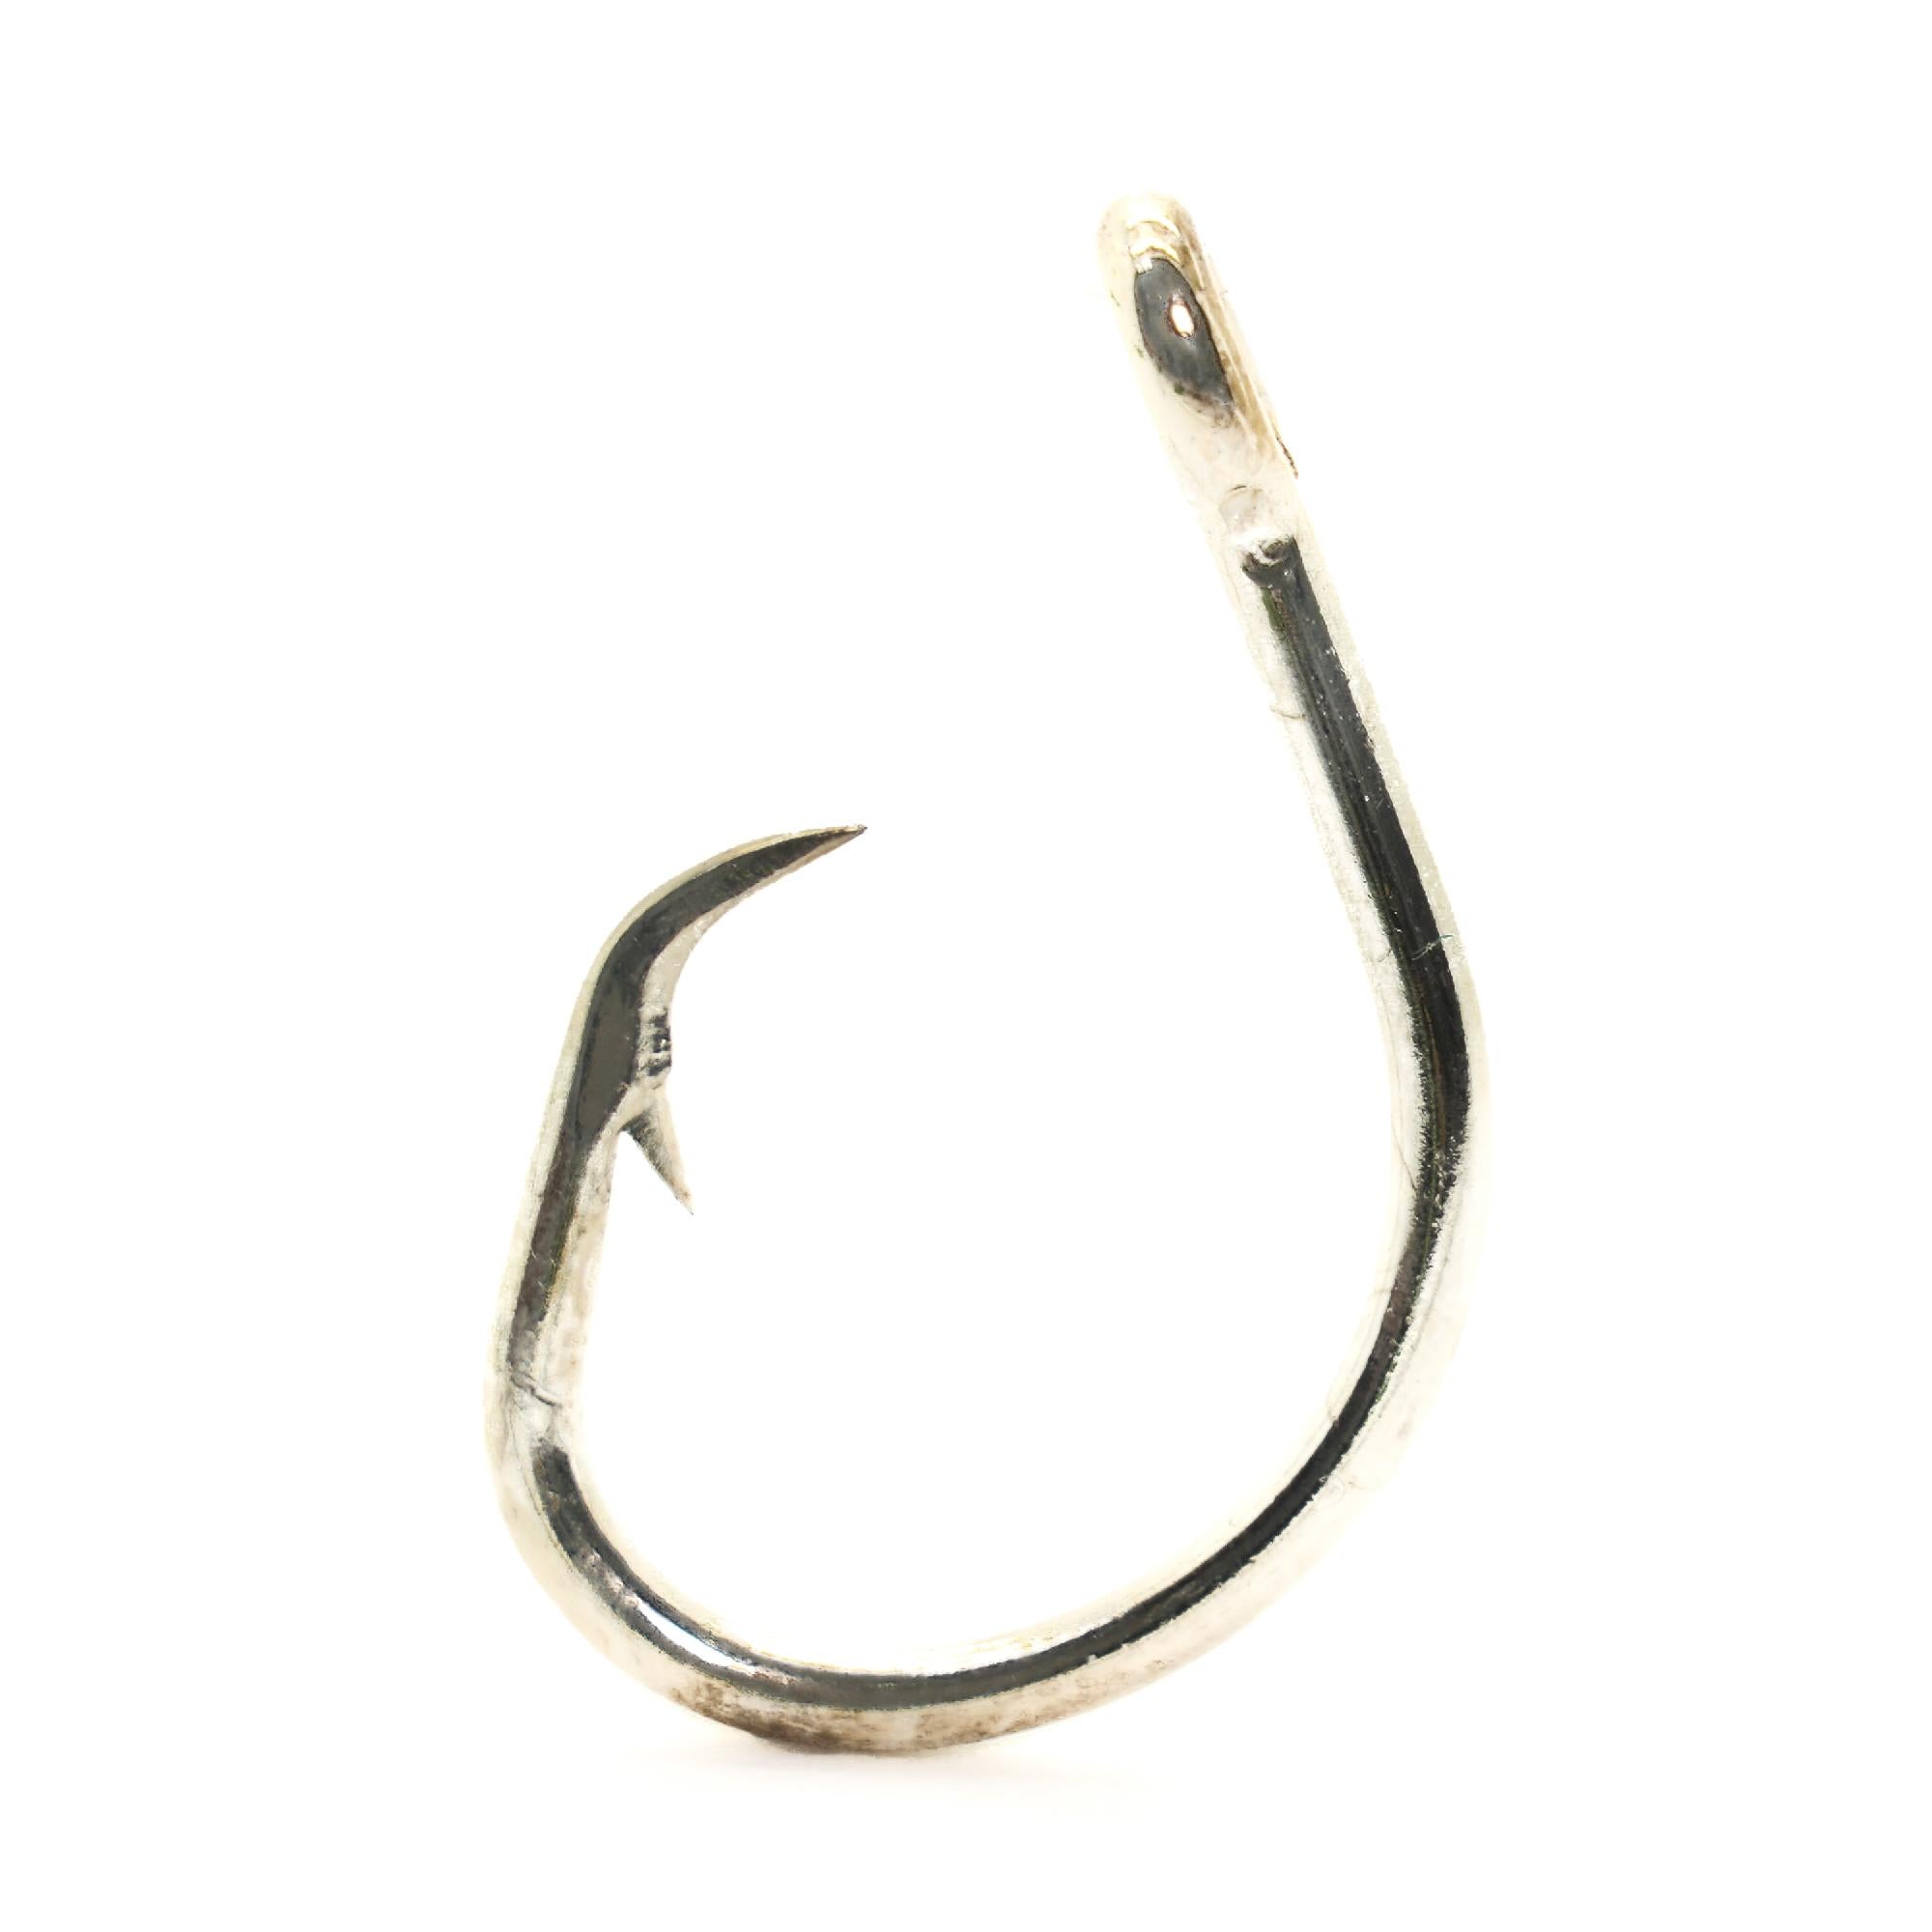 Mustad 39942BLN Ultra Point - Size 7/0 - 3X Strong Demon Circle Hooks